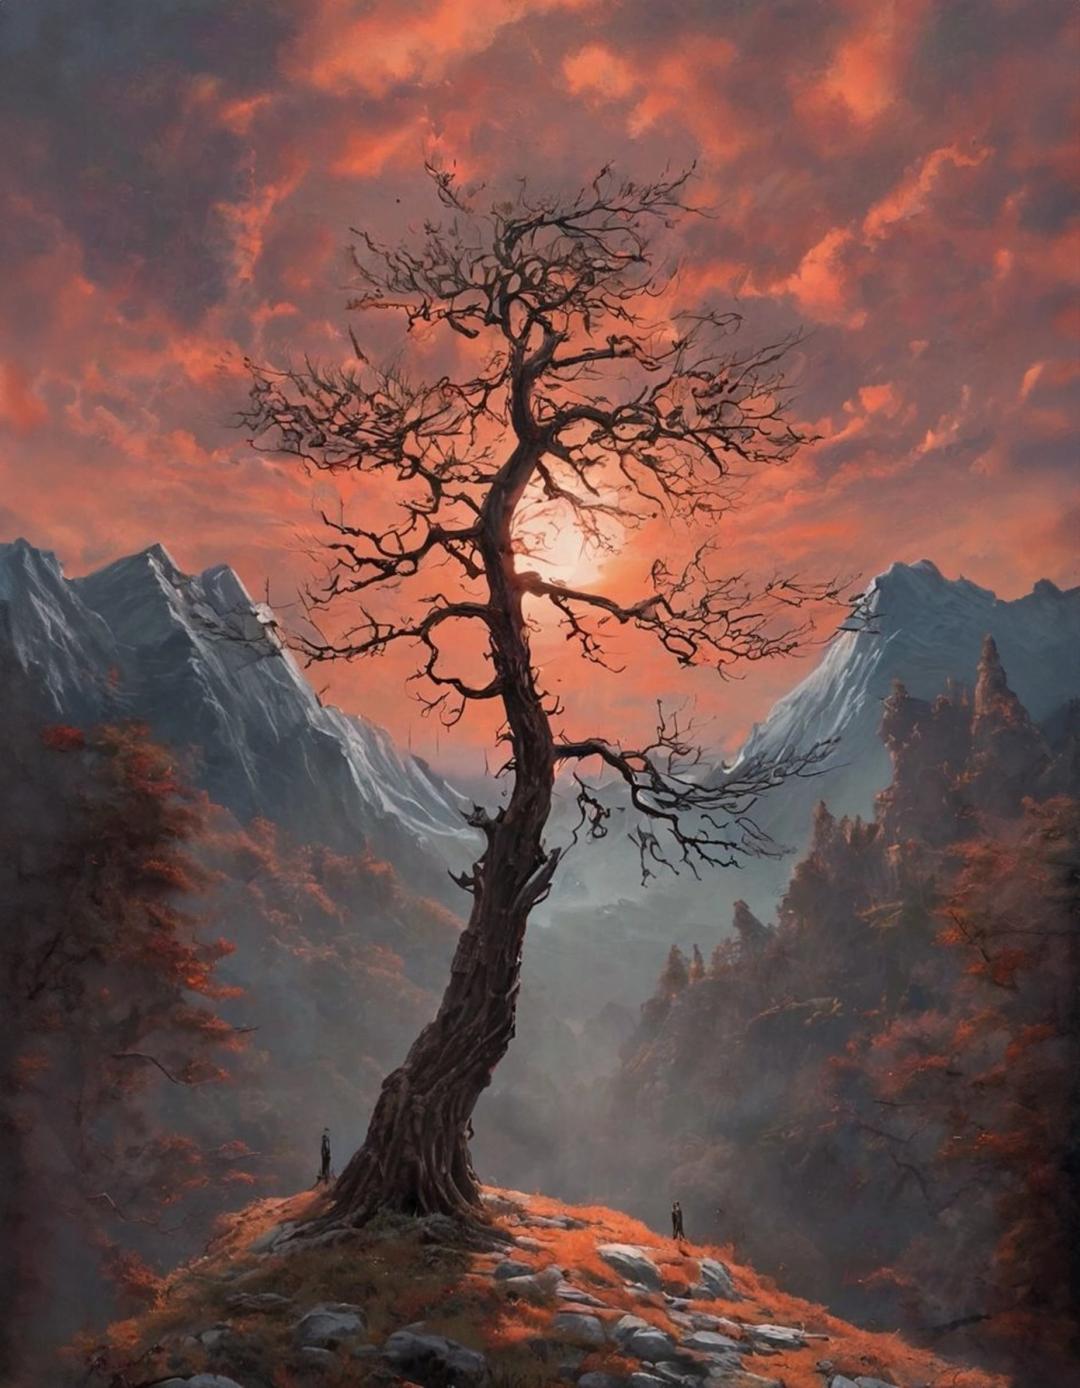 a painting of a giant tree in a mountainous area with a sunset in the background